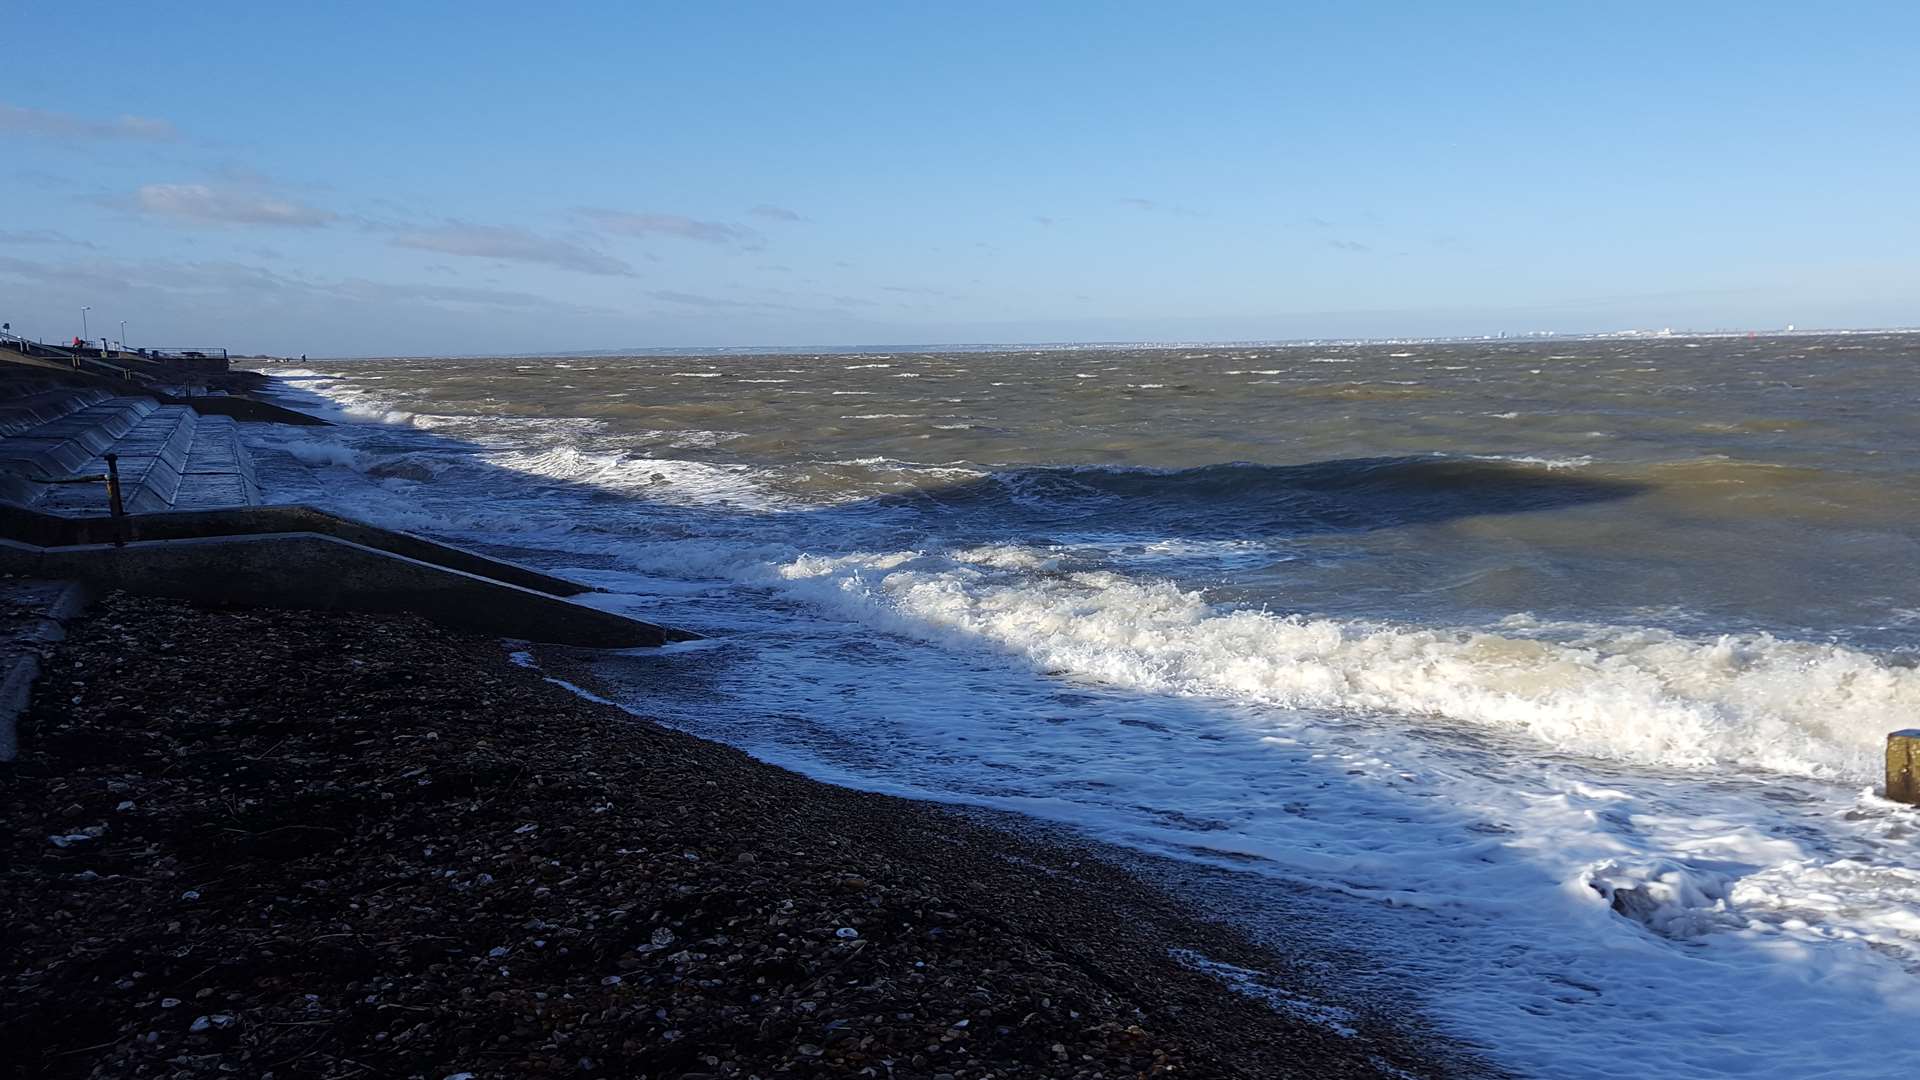 Sheerness: High tide this afternoon